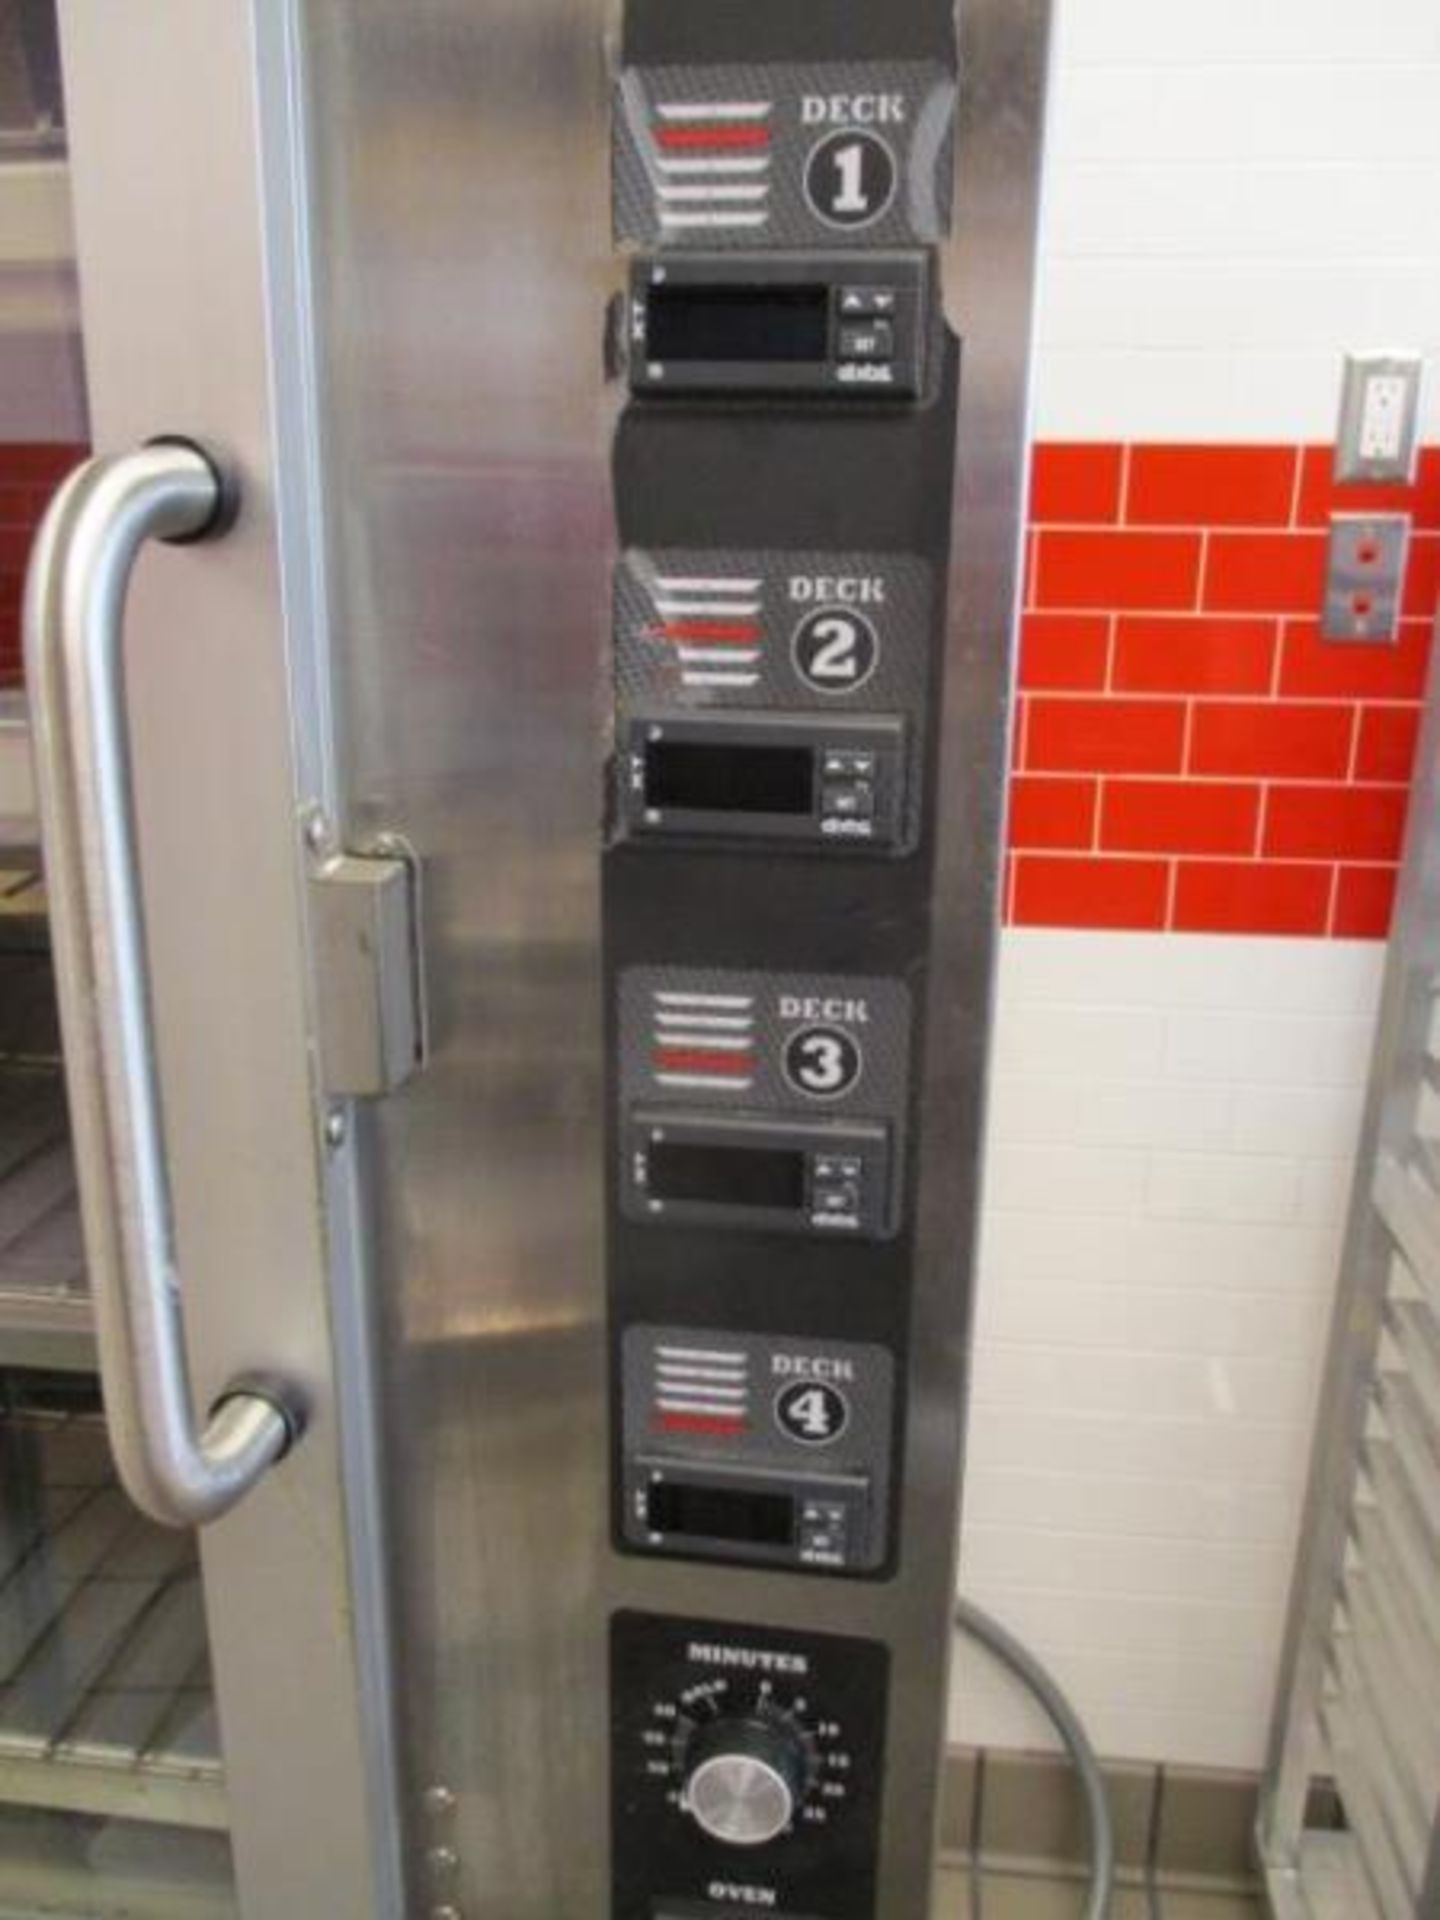 Piper Products Proofer/Oven Model Op-4-JJ-D, Serial # 42530, 120/208 volts, 3 phase, Made 6/9/2016 - Image 9 of 10